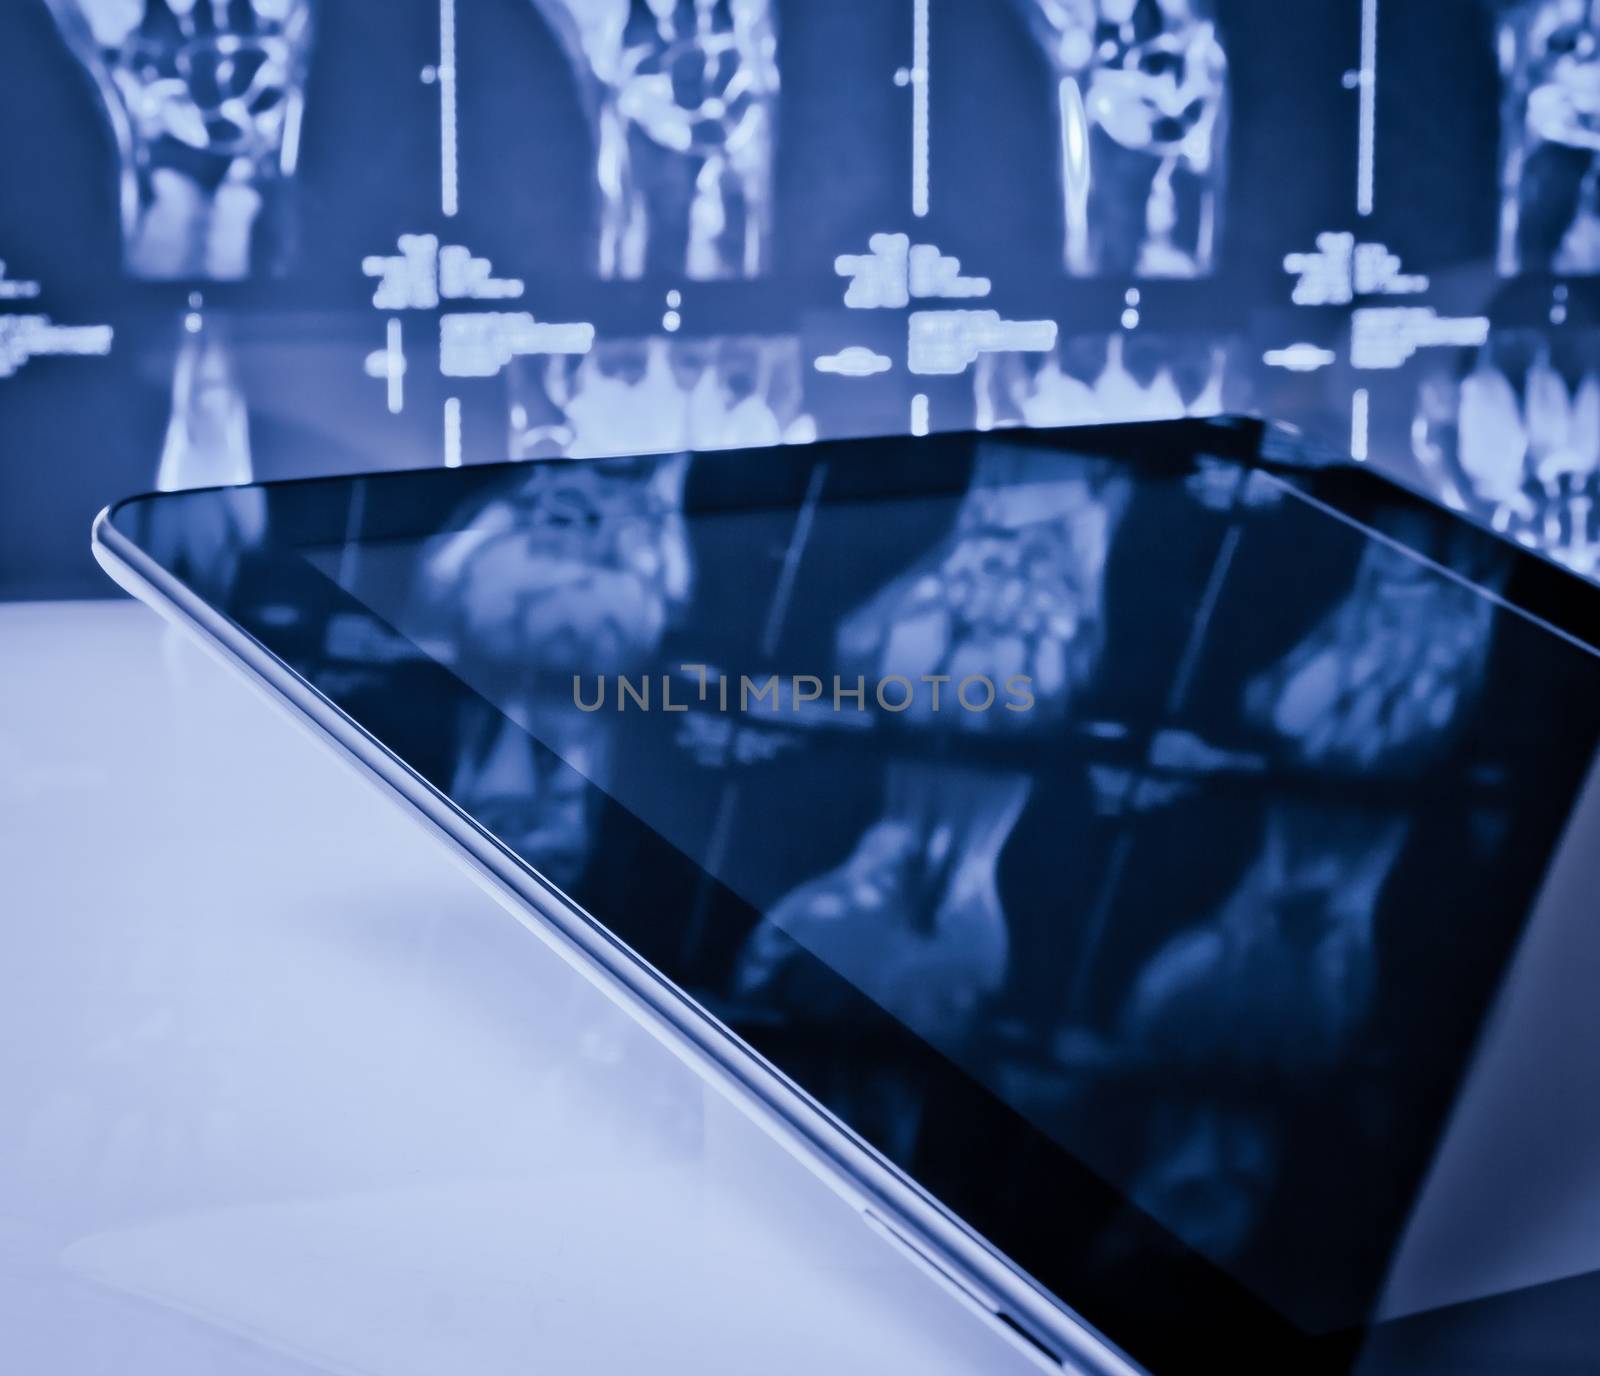 modern digital tablet pc in laboratory on x-ray images background. concept of medical or research theme